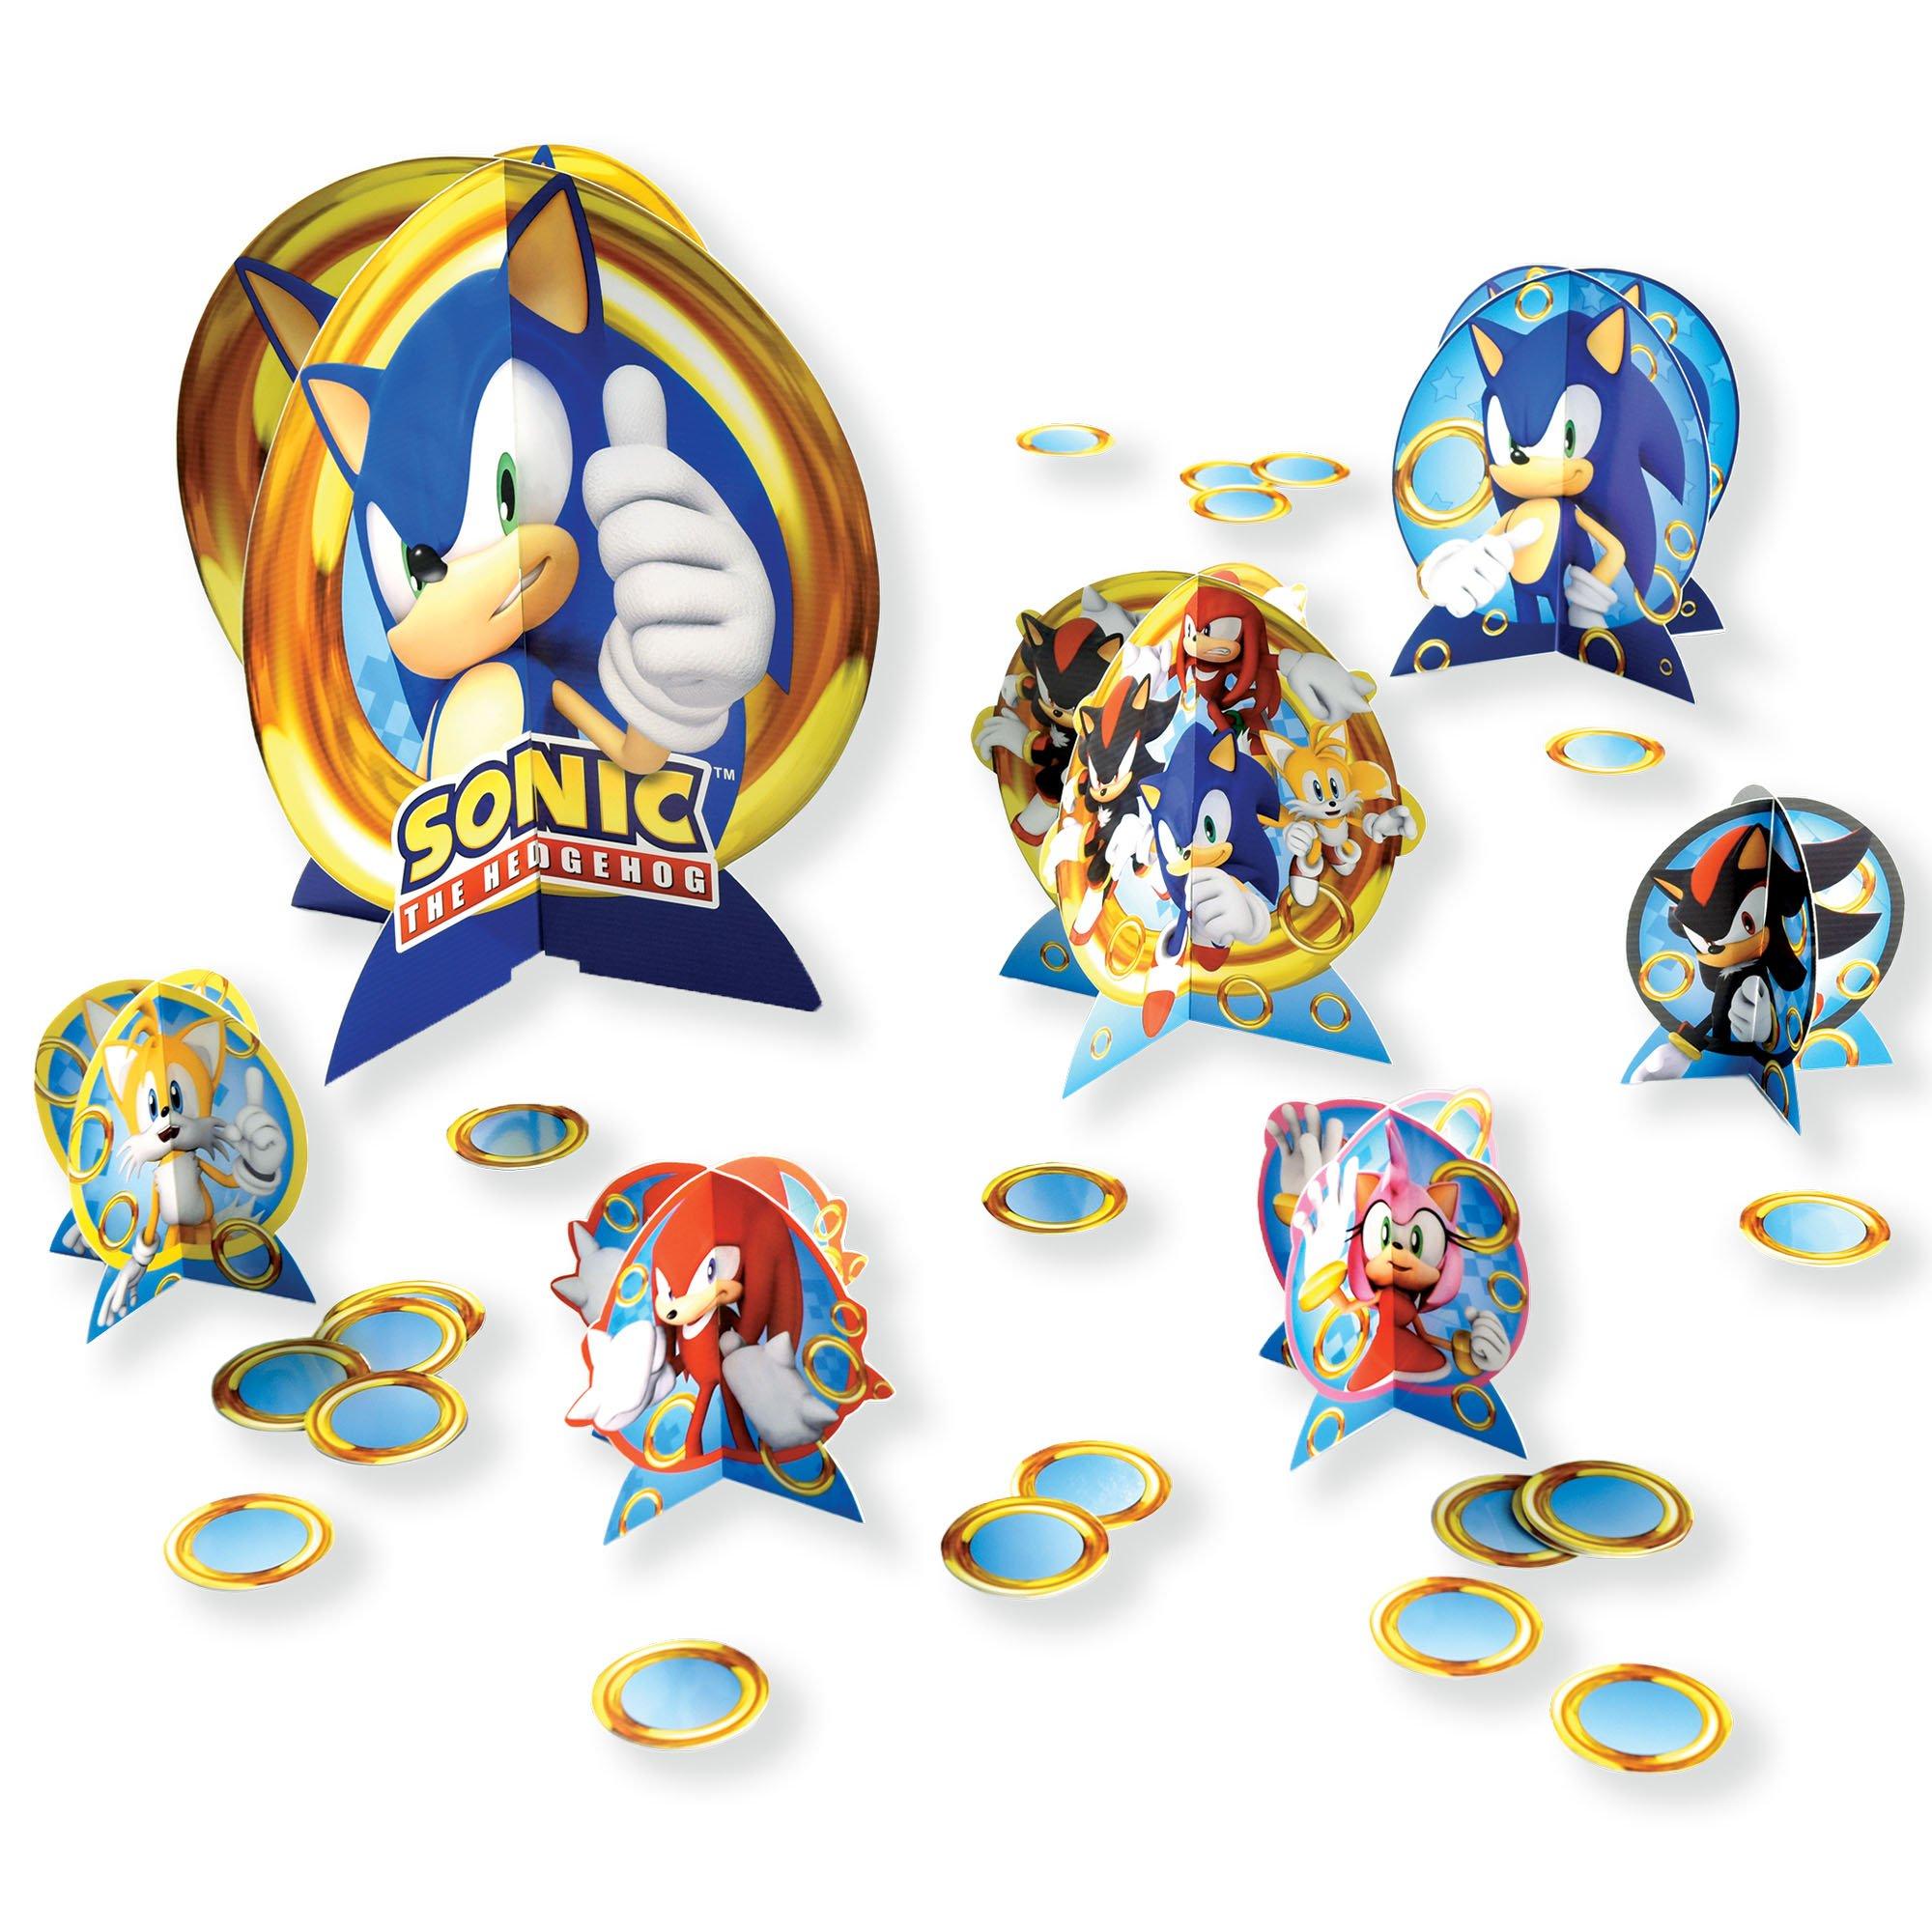 Sonic The Hedgehog - Table Centerpiece Kit